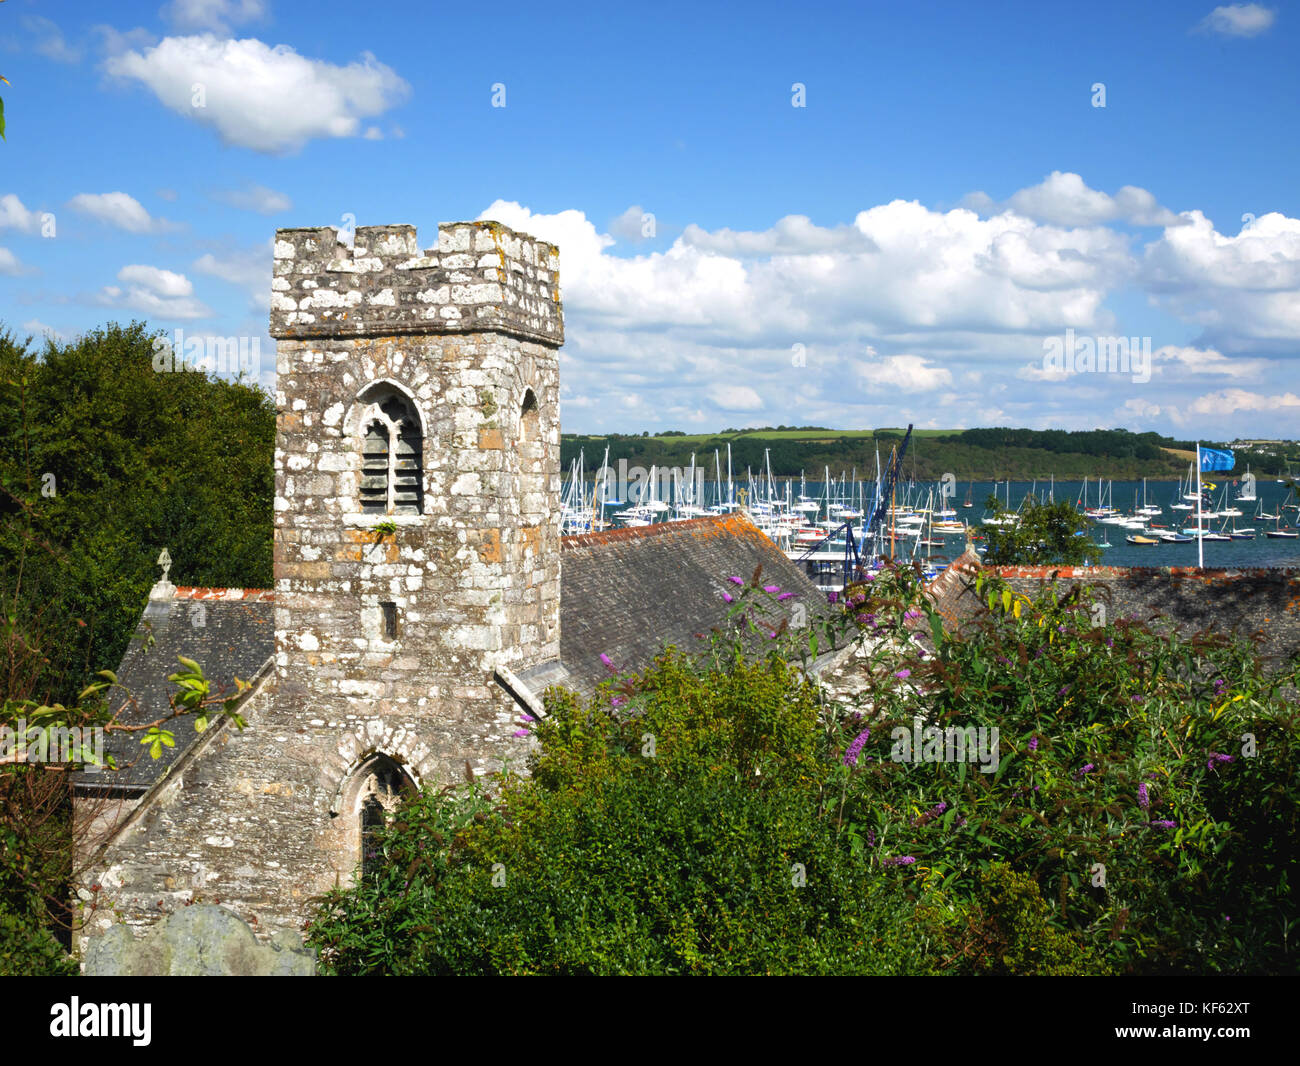 The church of St Melorus at Mylor in Cornwall overlooks the creek of the River Fal. Stock Photo